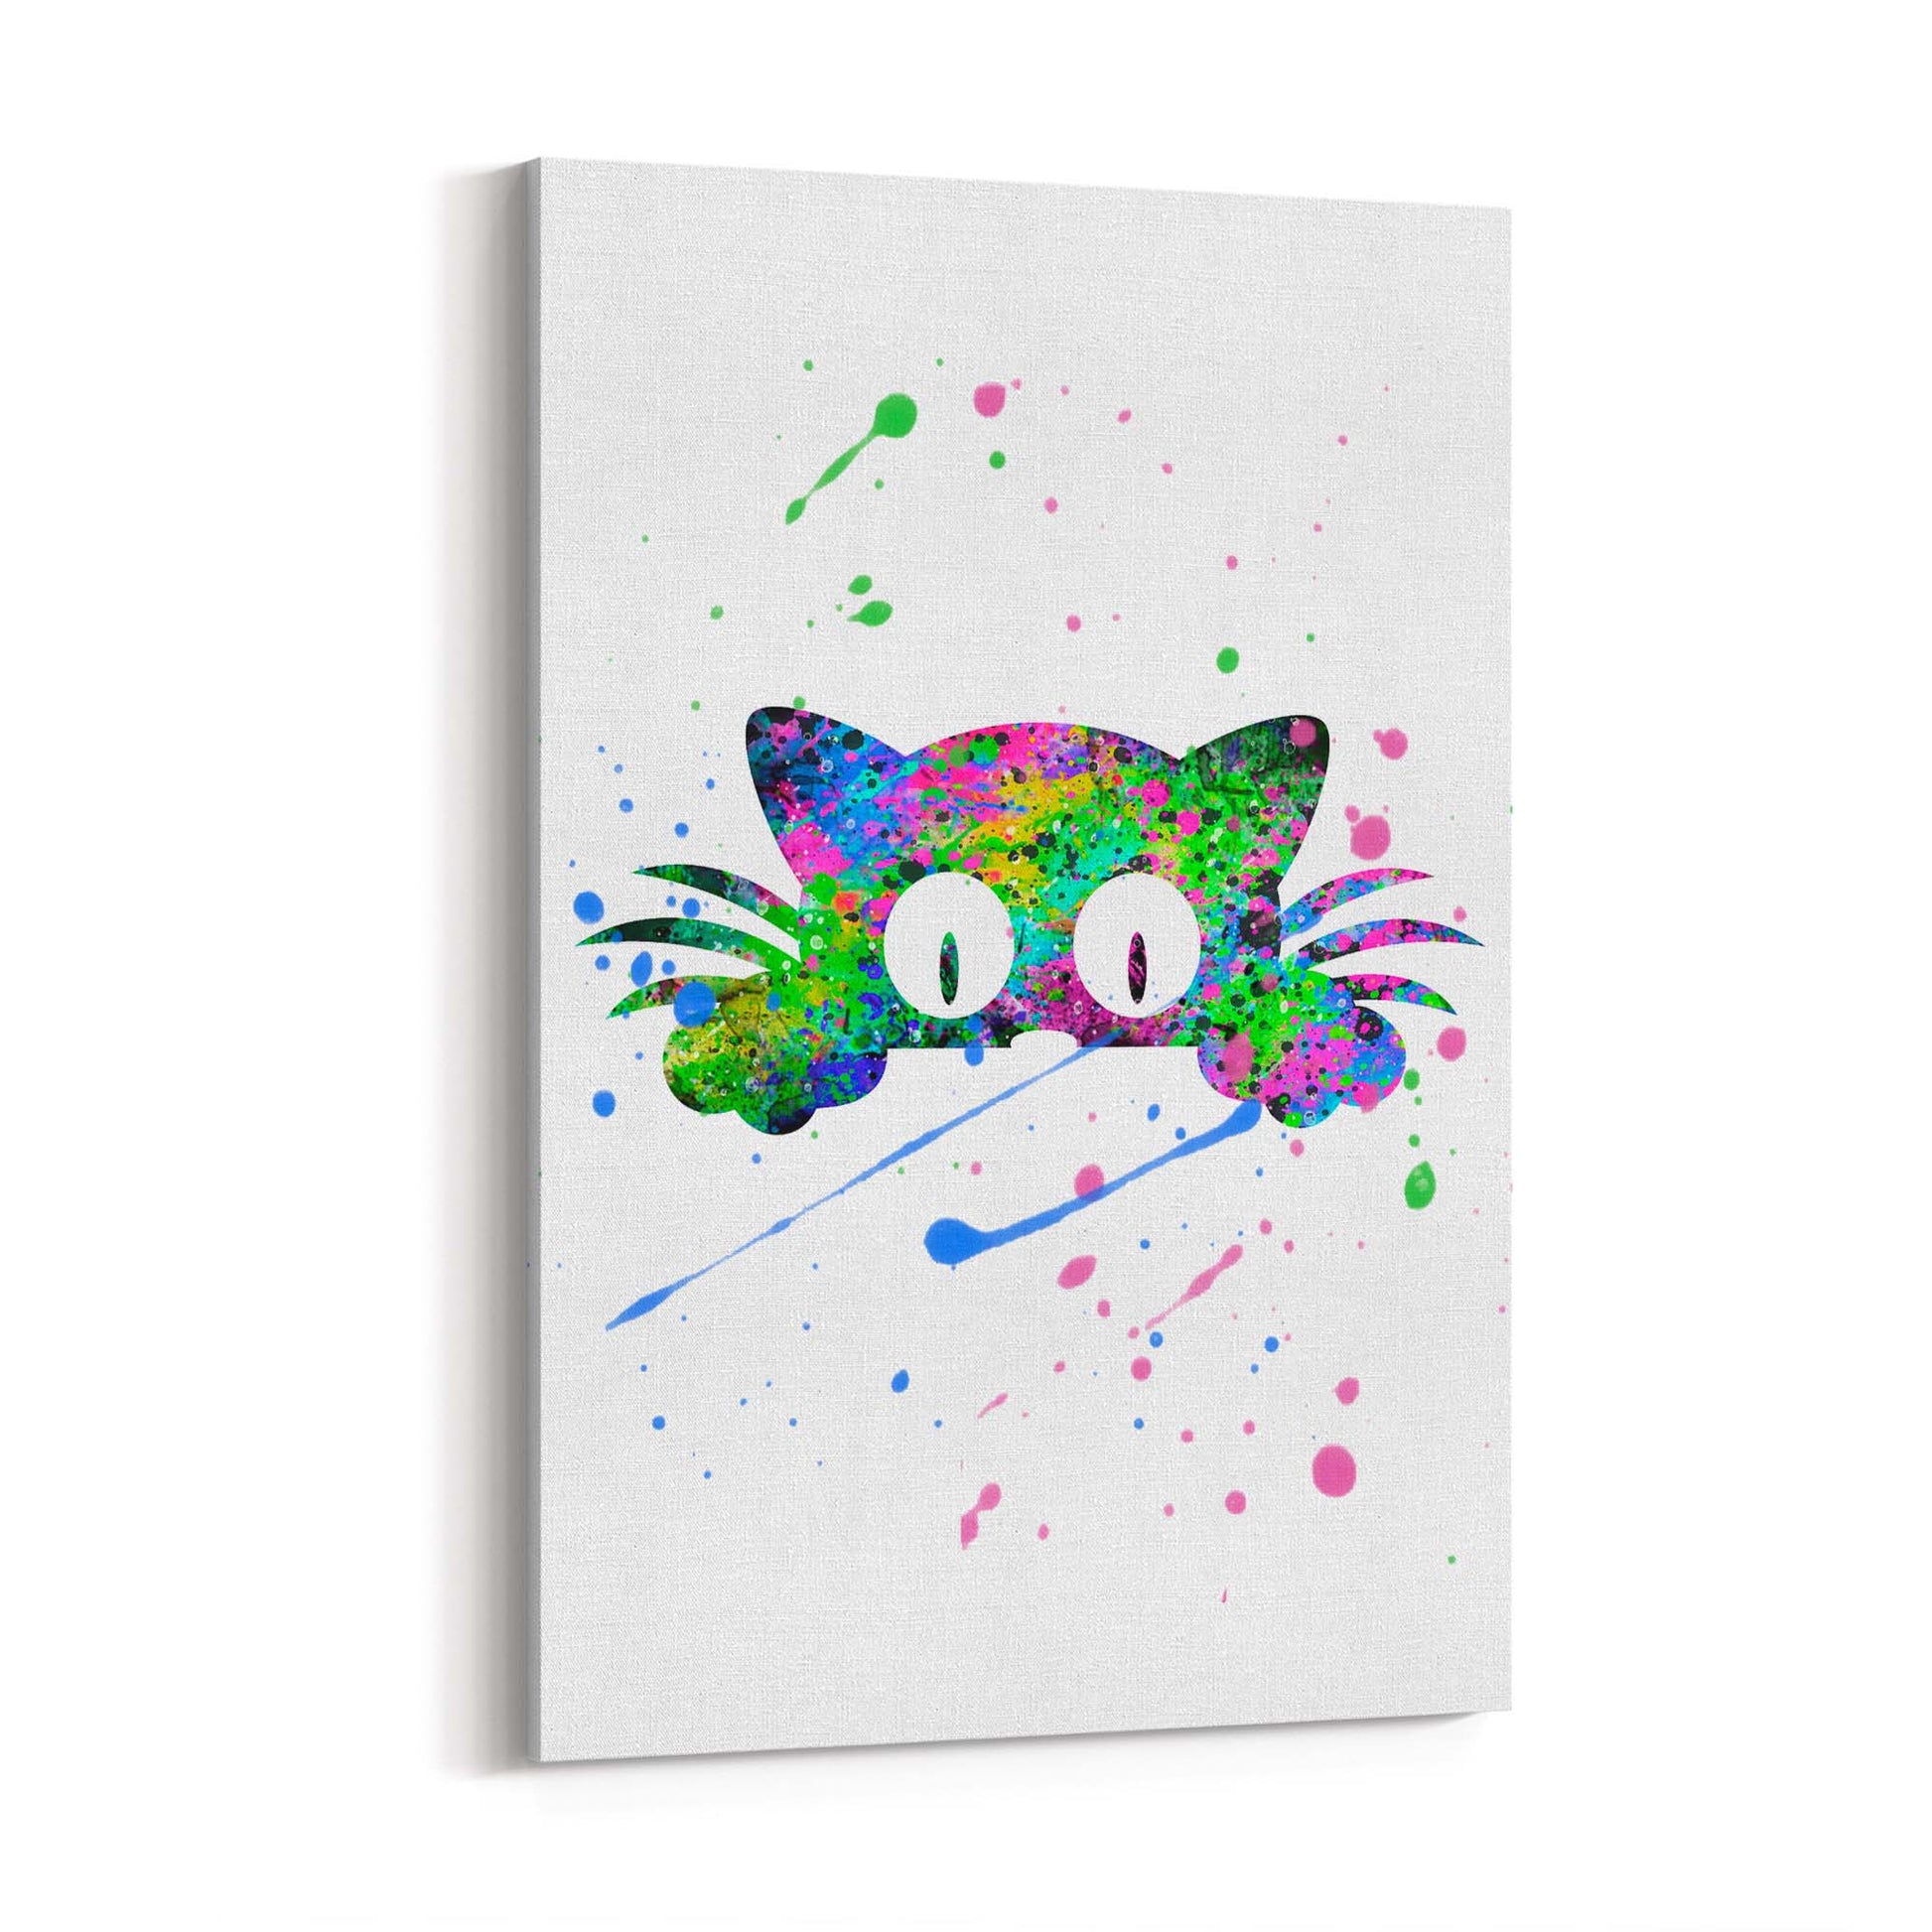 Cute Cat Painting Colourful Animal Wall Art #2 - The Affordable Art Company